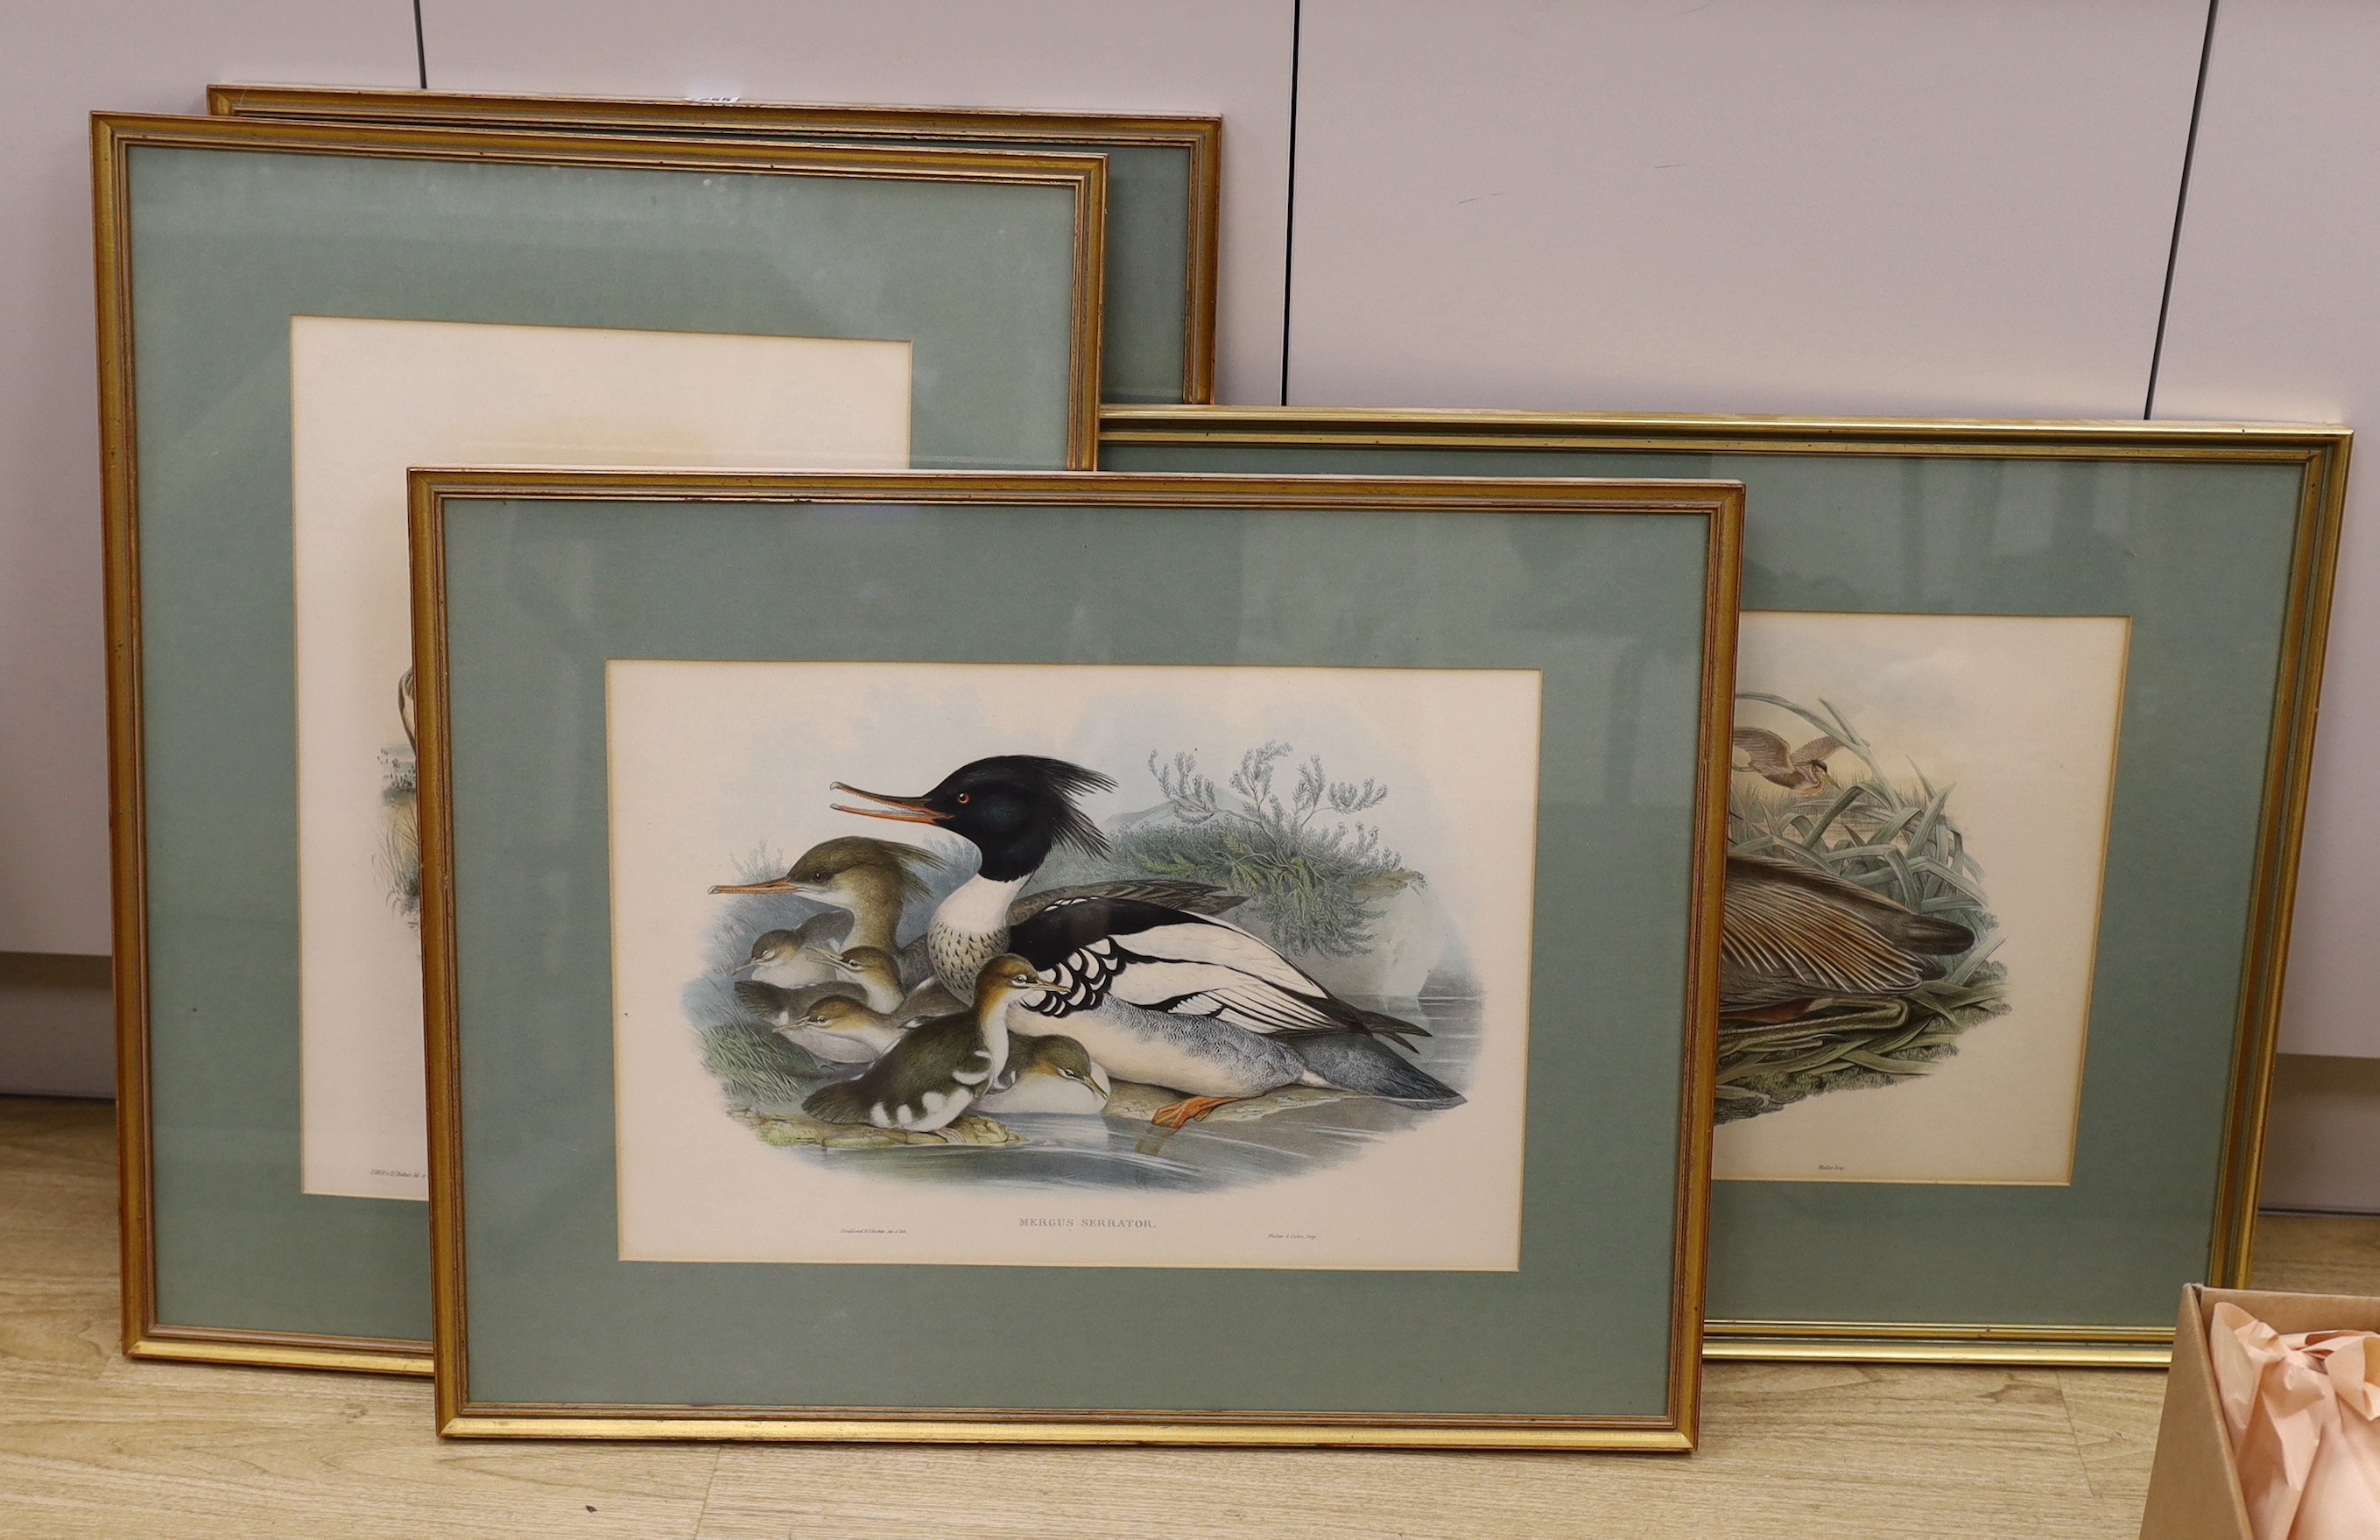 After John Gould, J. Wolf & H.C.Richter, six assorted colour lithographs from The Birds of Great Britain, largest 53 x 36cm                                                                                                 